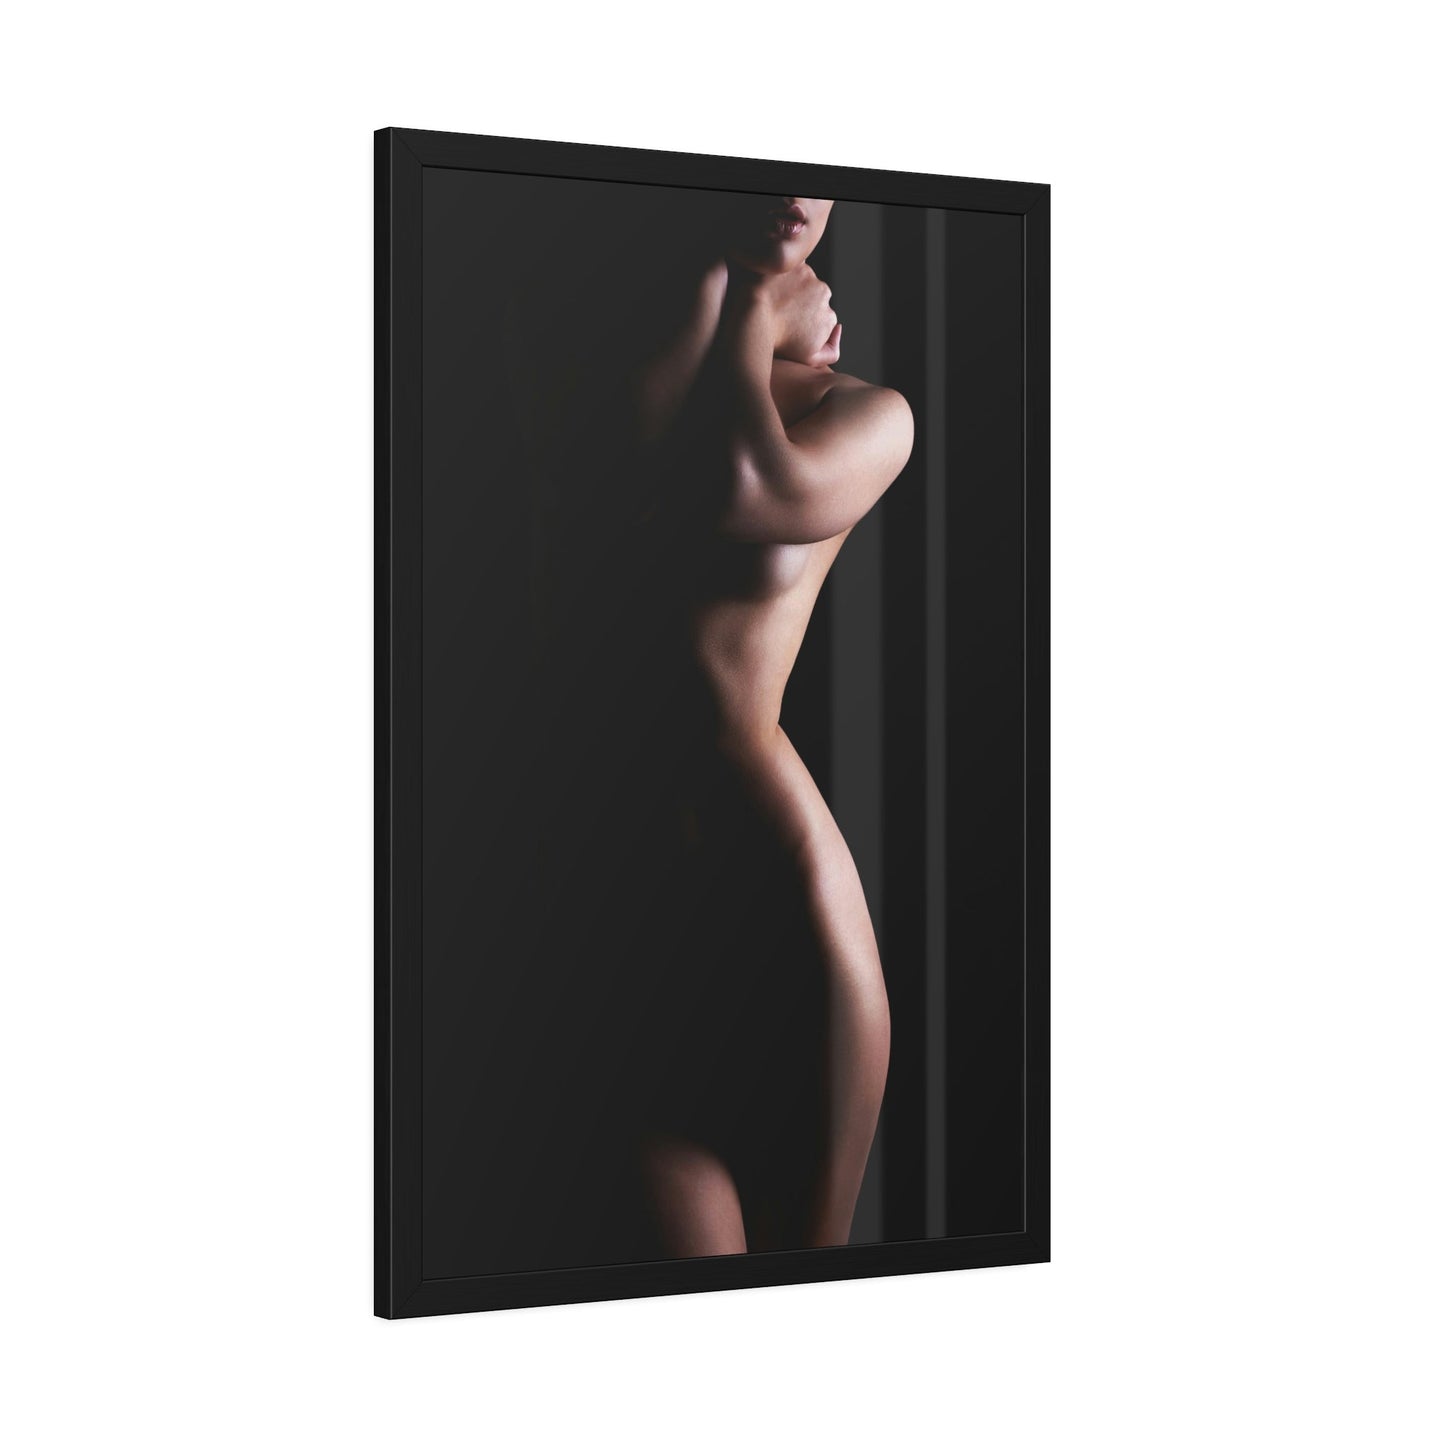 Erotic Bliss: Beautiful Canvas Prints to Set the Mood